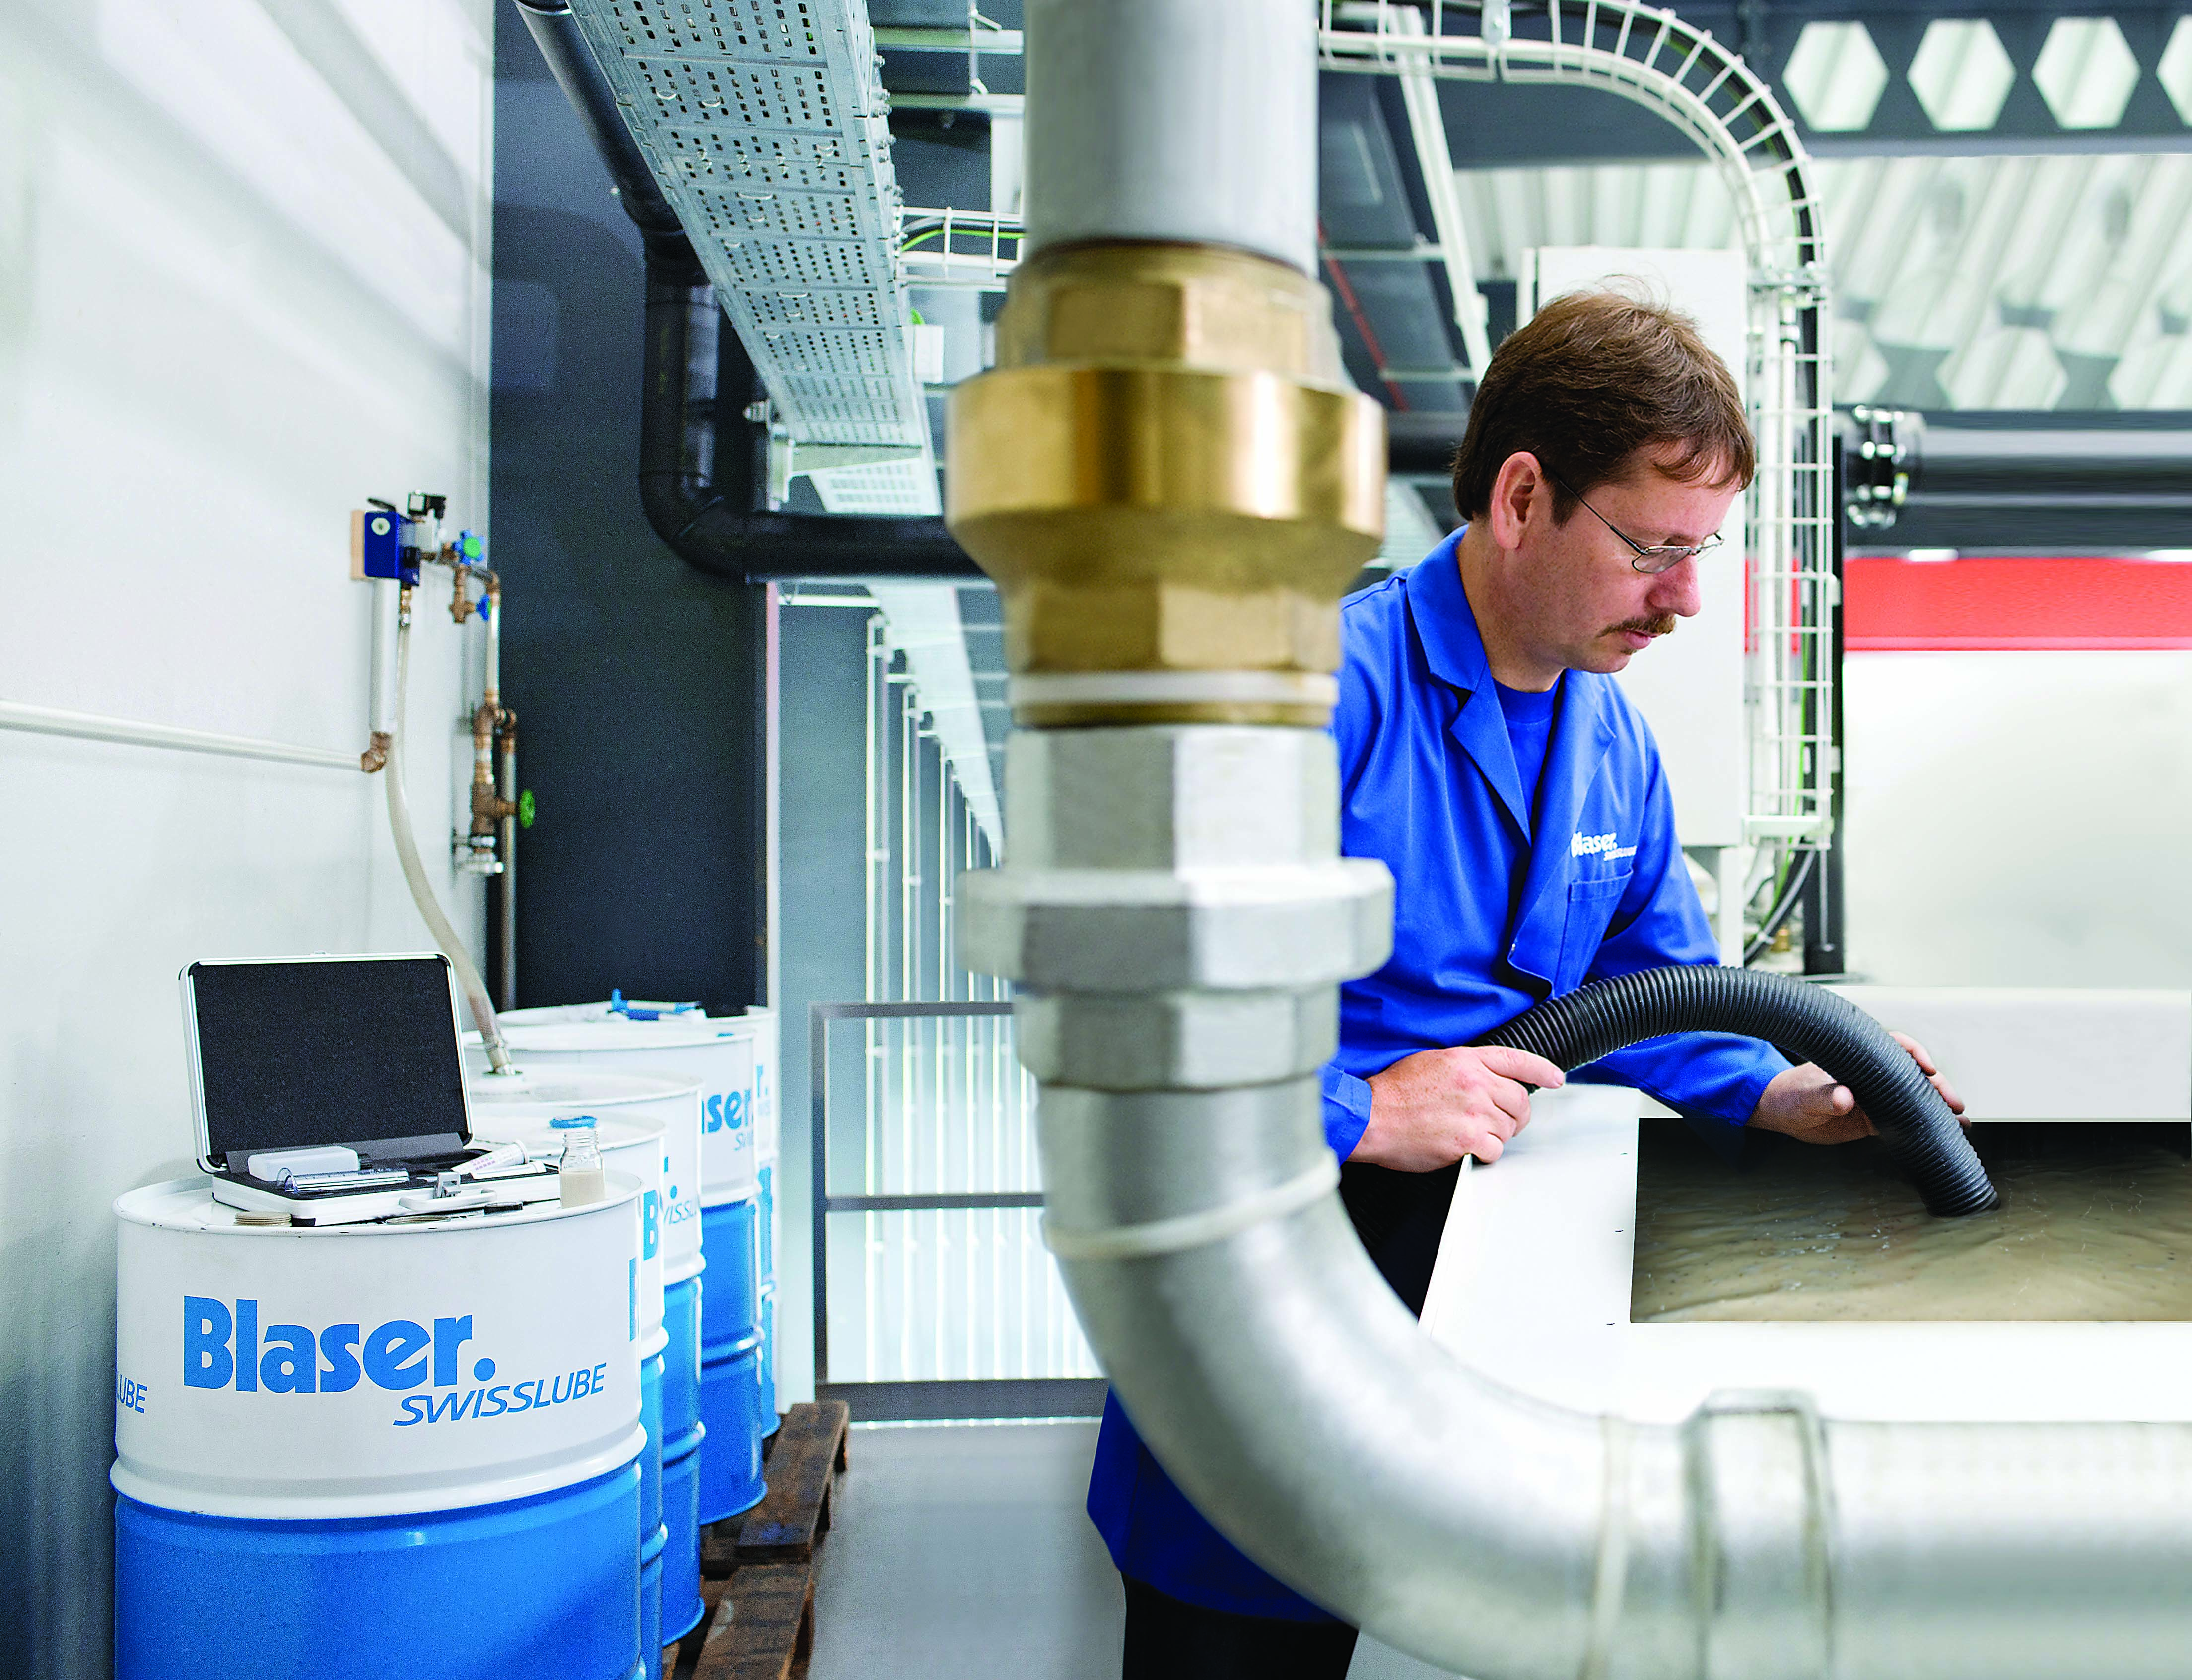 Manual coolant maintenance tasks can be reduced by choosing the right recycling equipment.